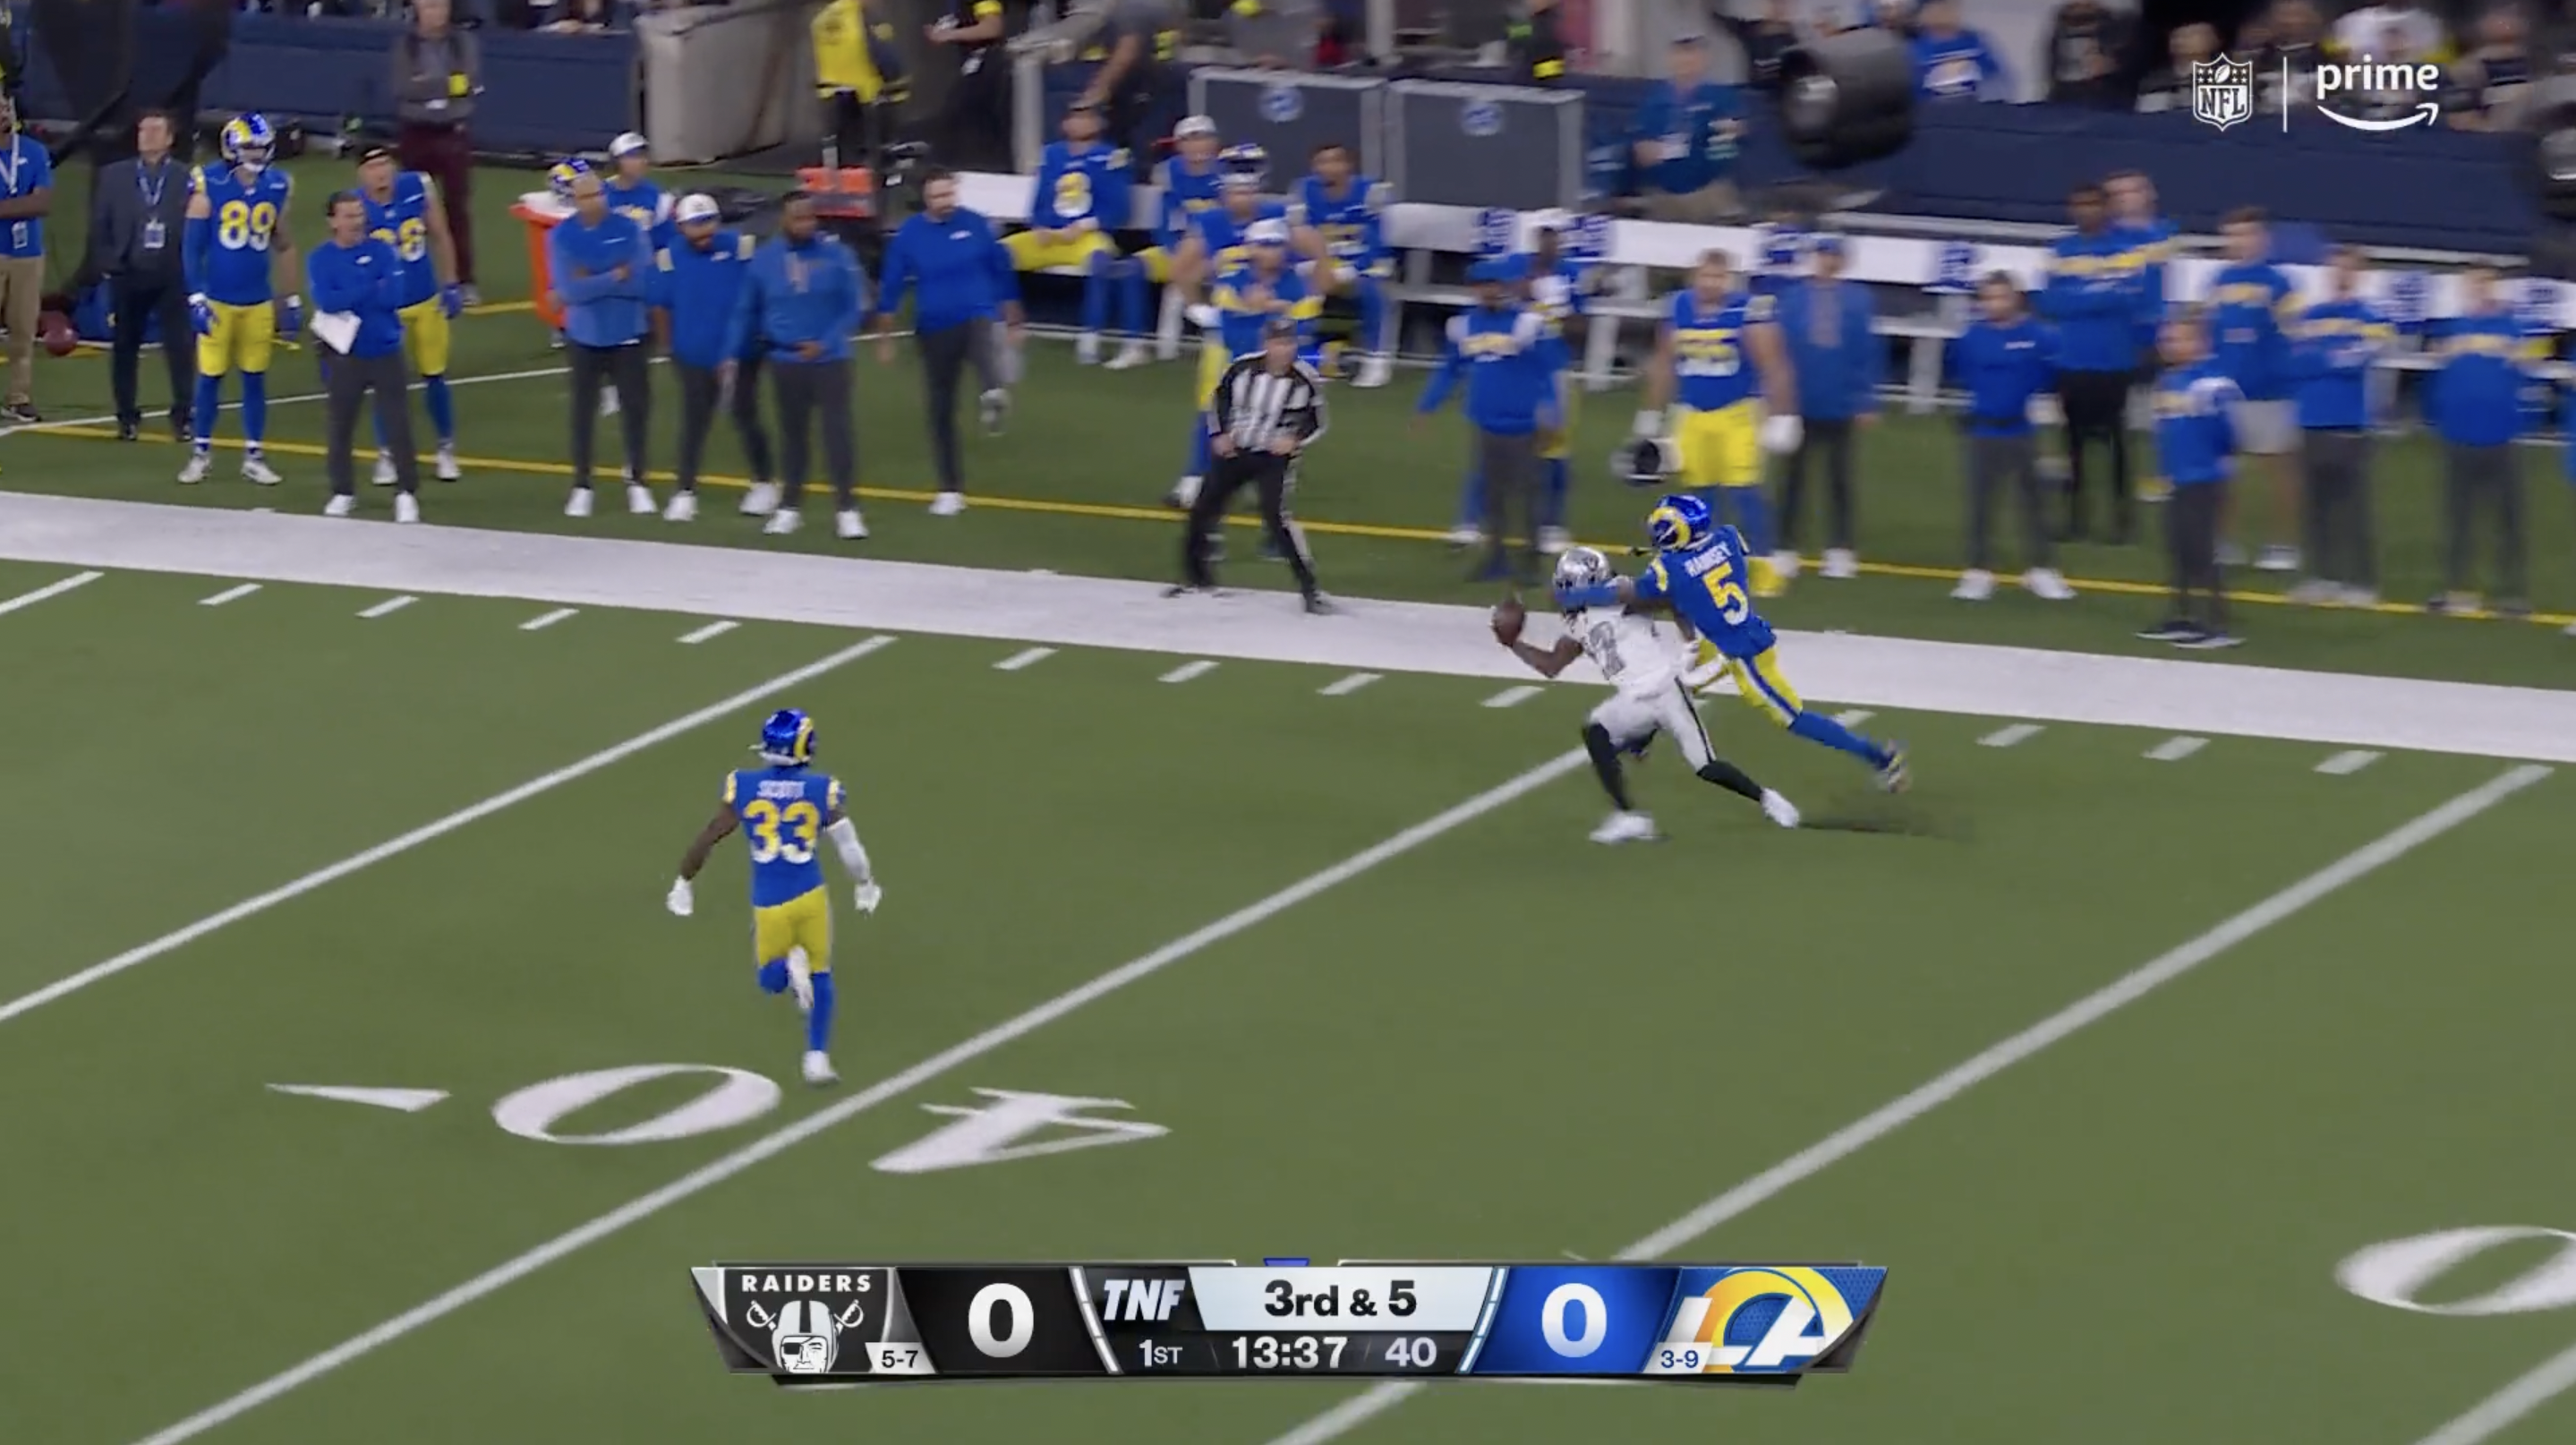 Raiders' Davante Adams makes ridiculous one-handed catch over Rams